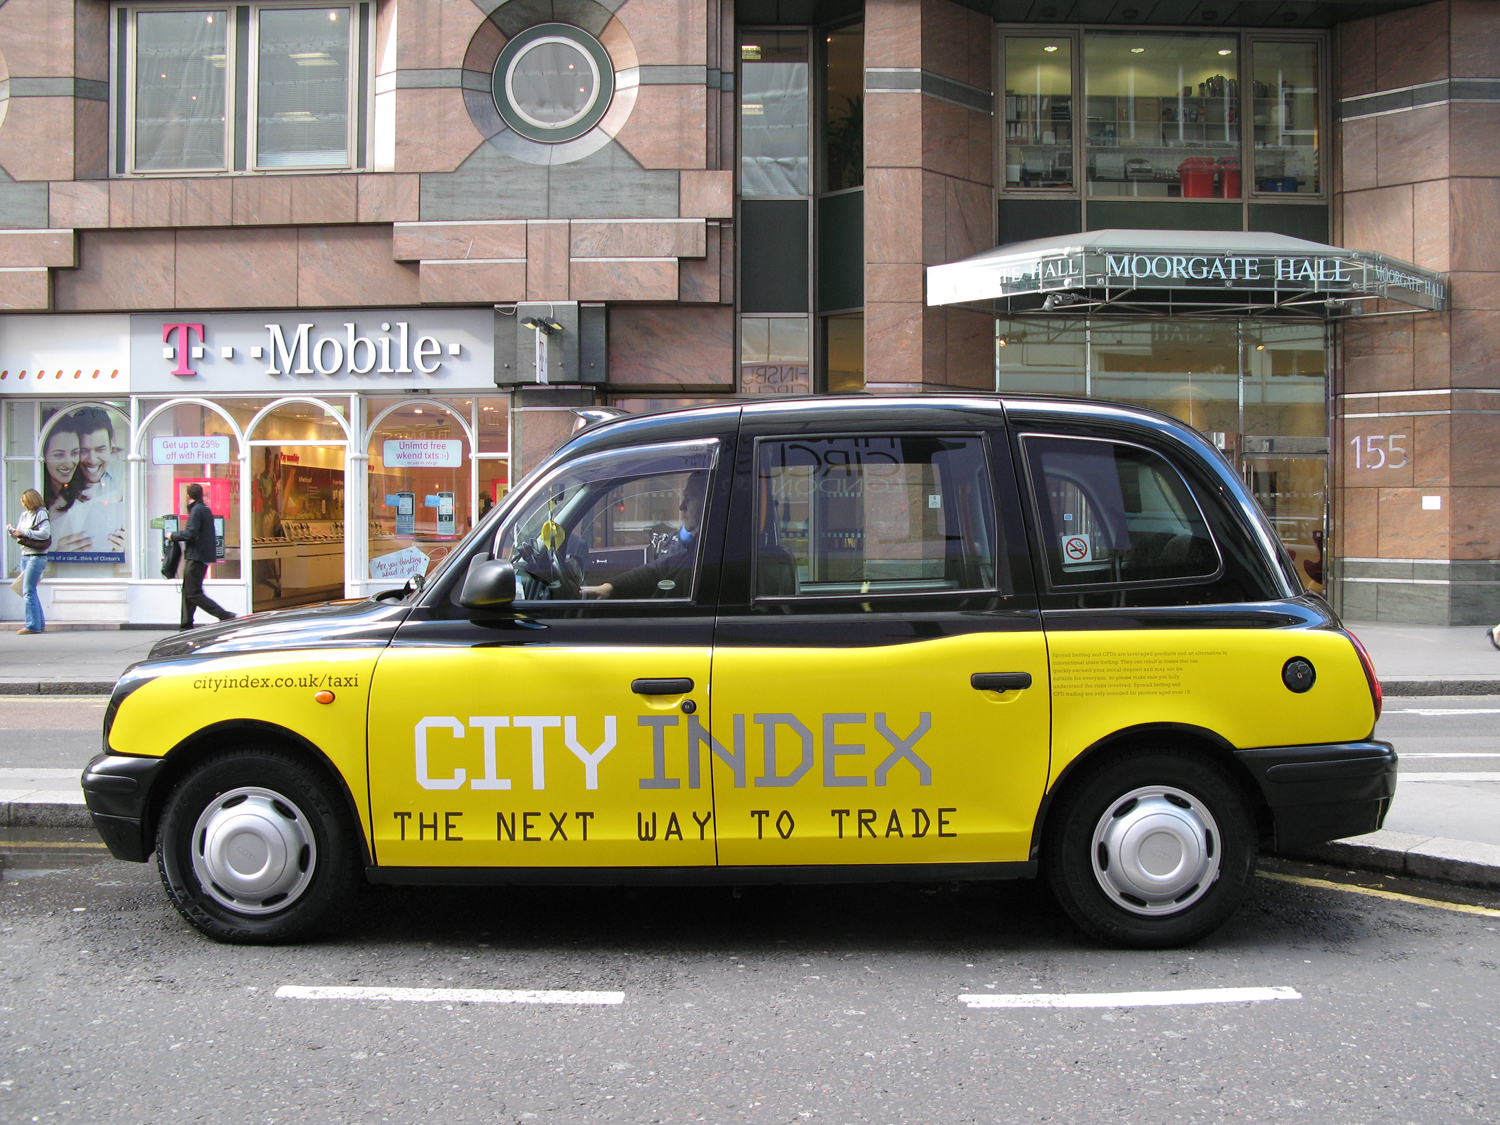 2007 Ubiquitous taxi advertising campaign for City Index - The next way to trade